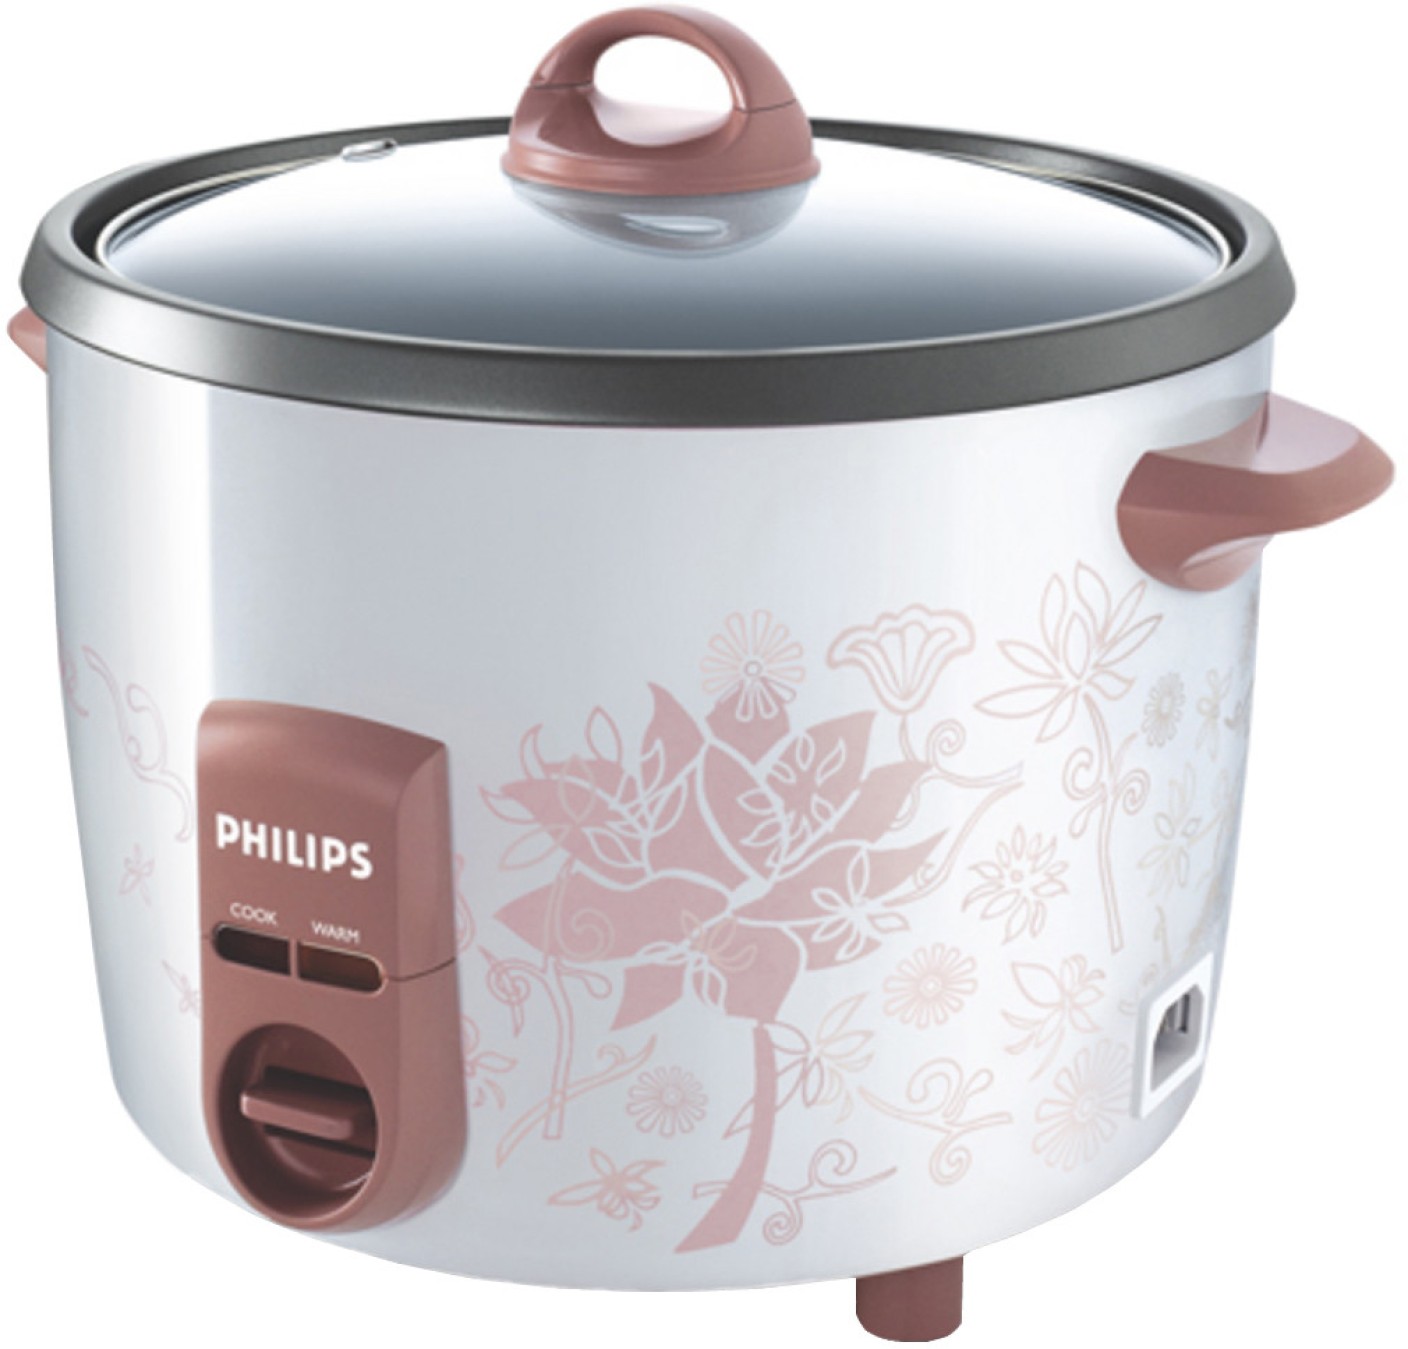 Philips HD4715/60 Electric Rice Cooker Price in India - Buy Philips ...